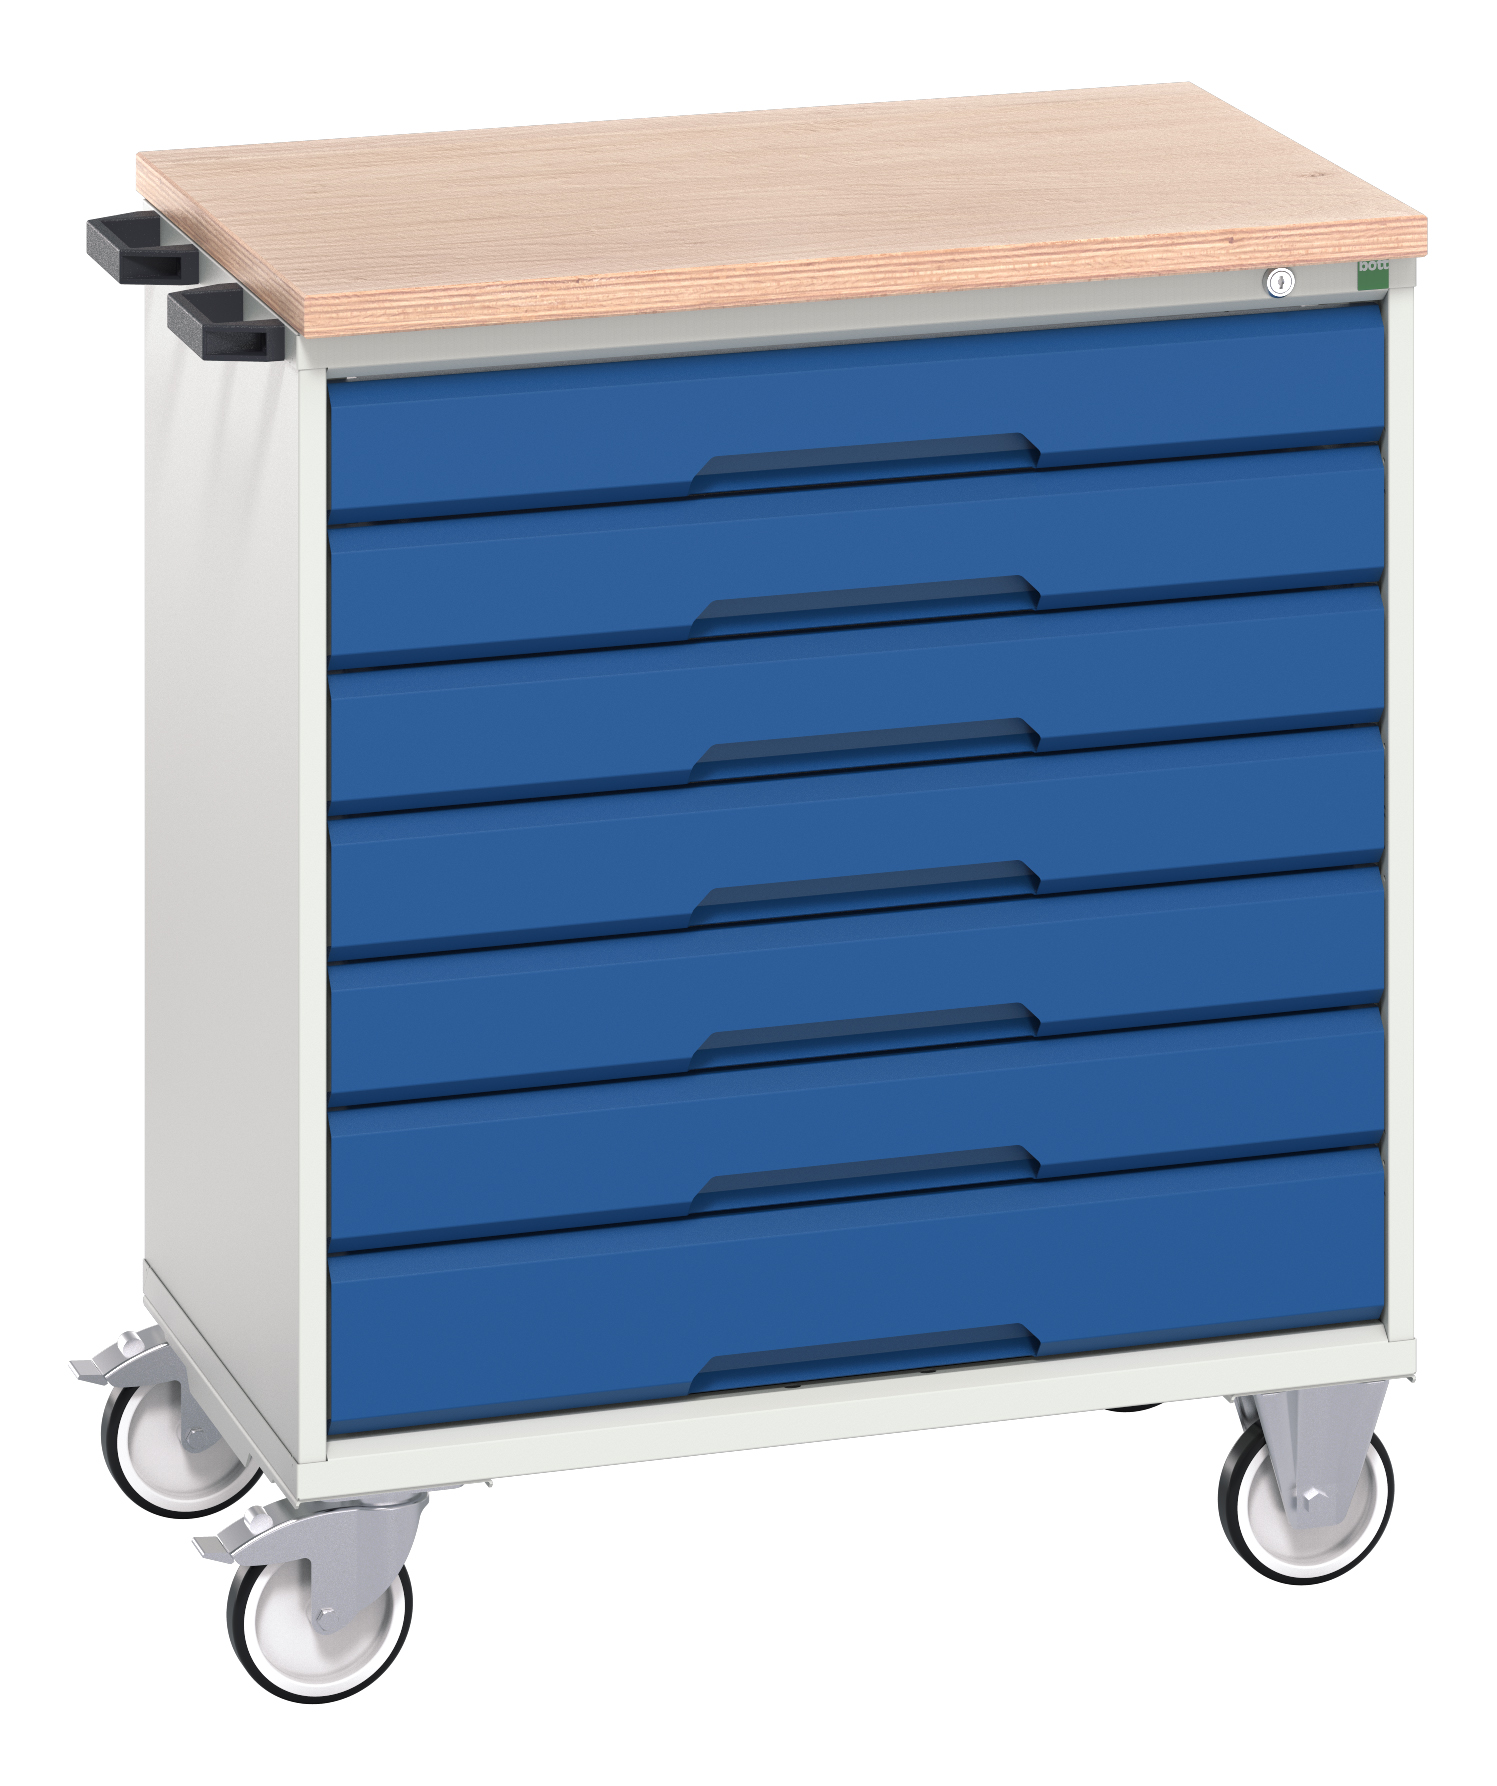 Bott Verso Mobile Drawer Cabinet With 7 Drawers & Multiplex Top - 16927007.11